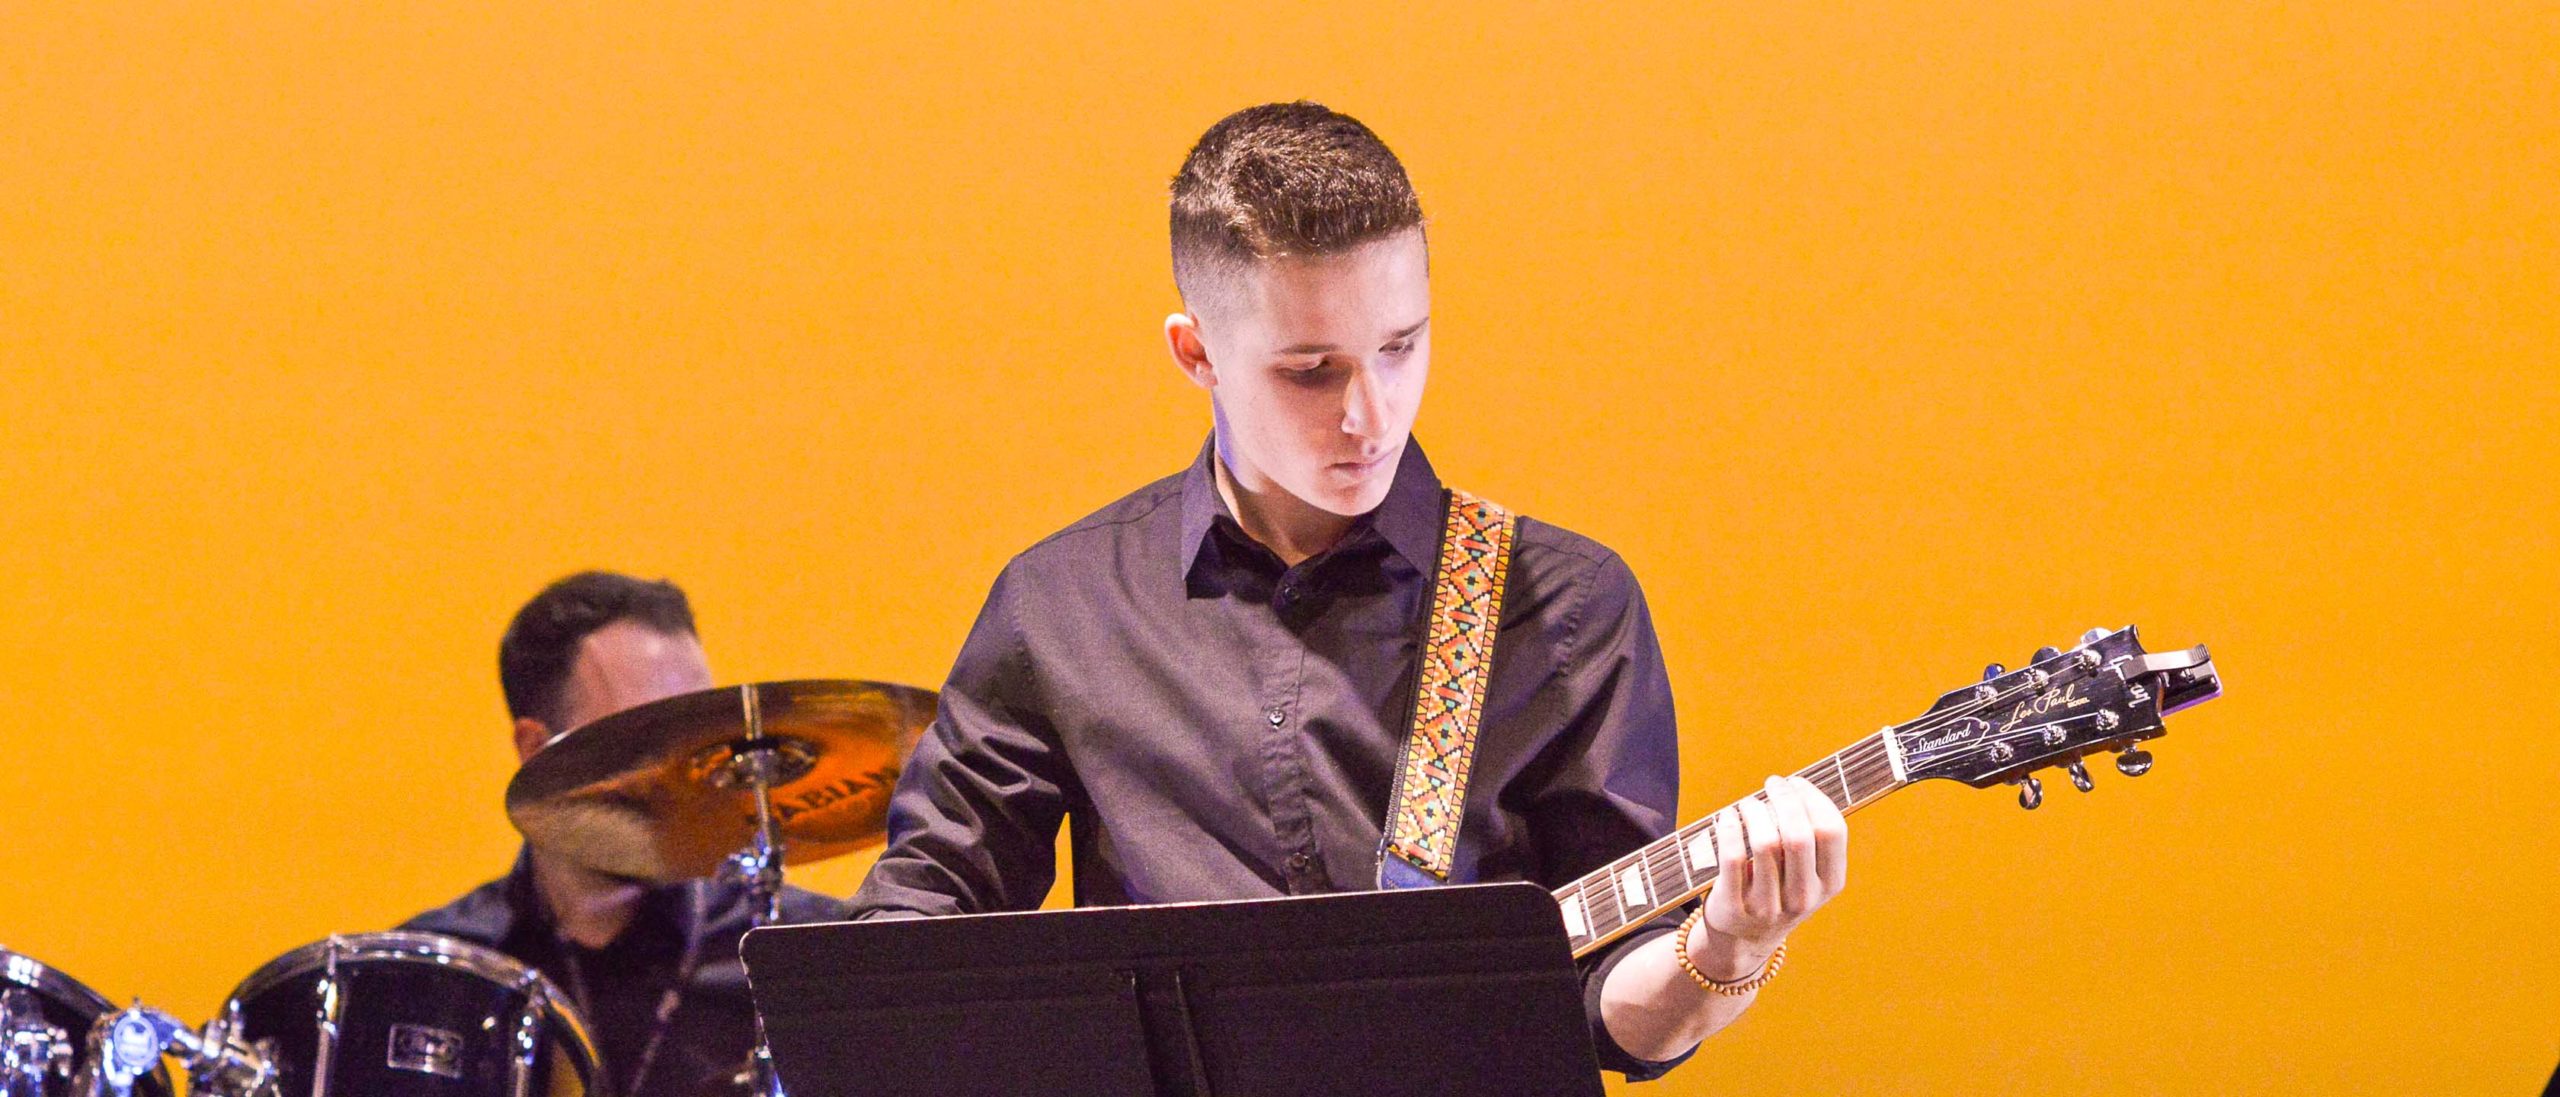 Boy student playing the guitar on stage